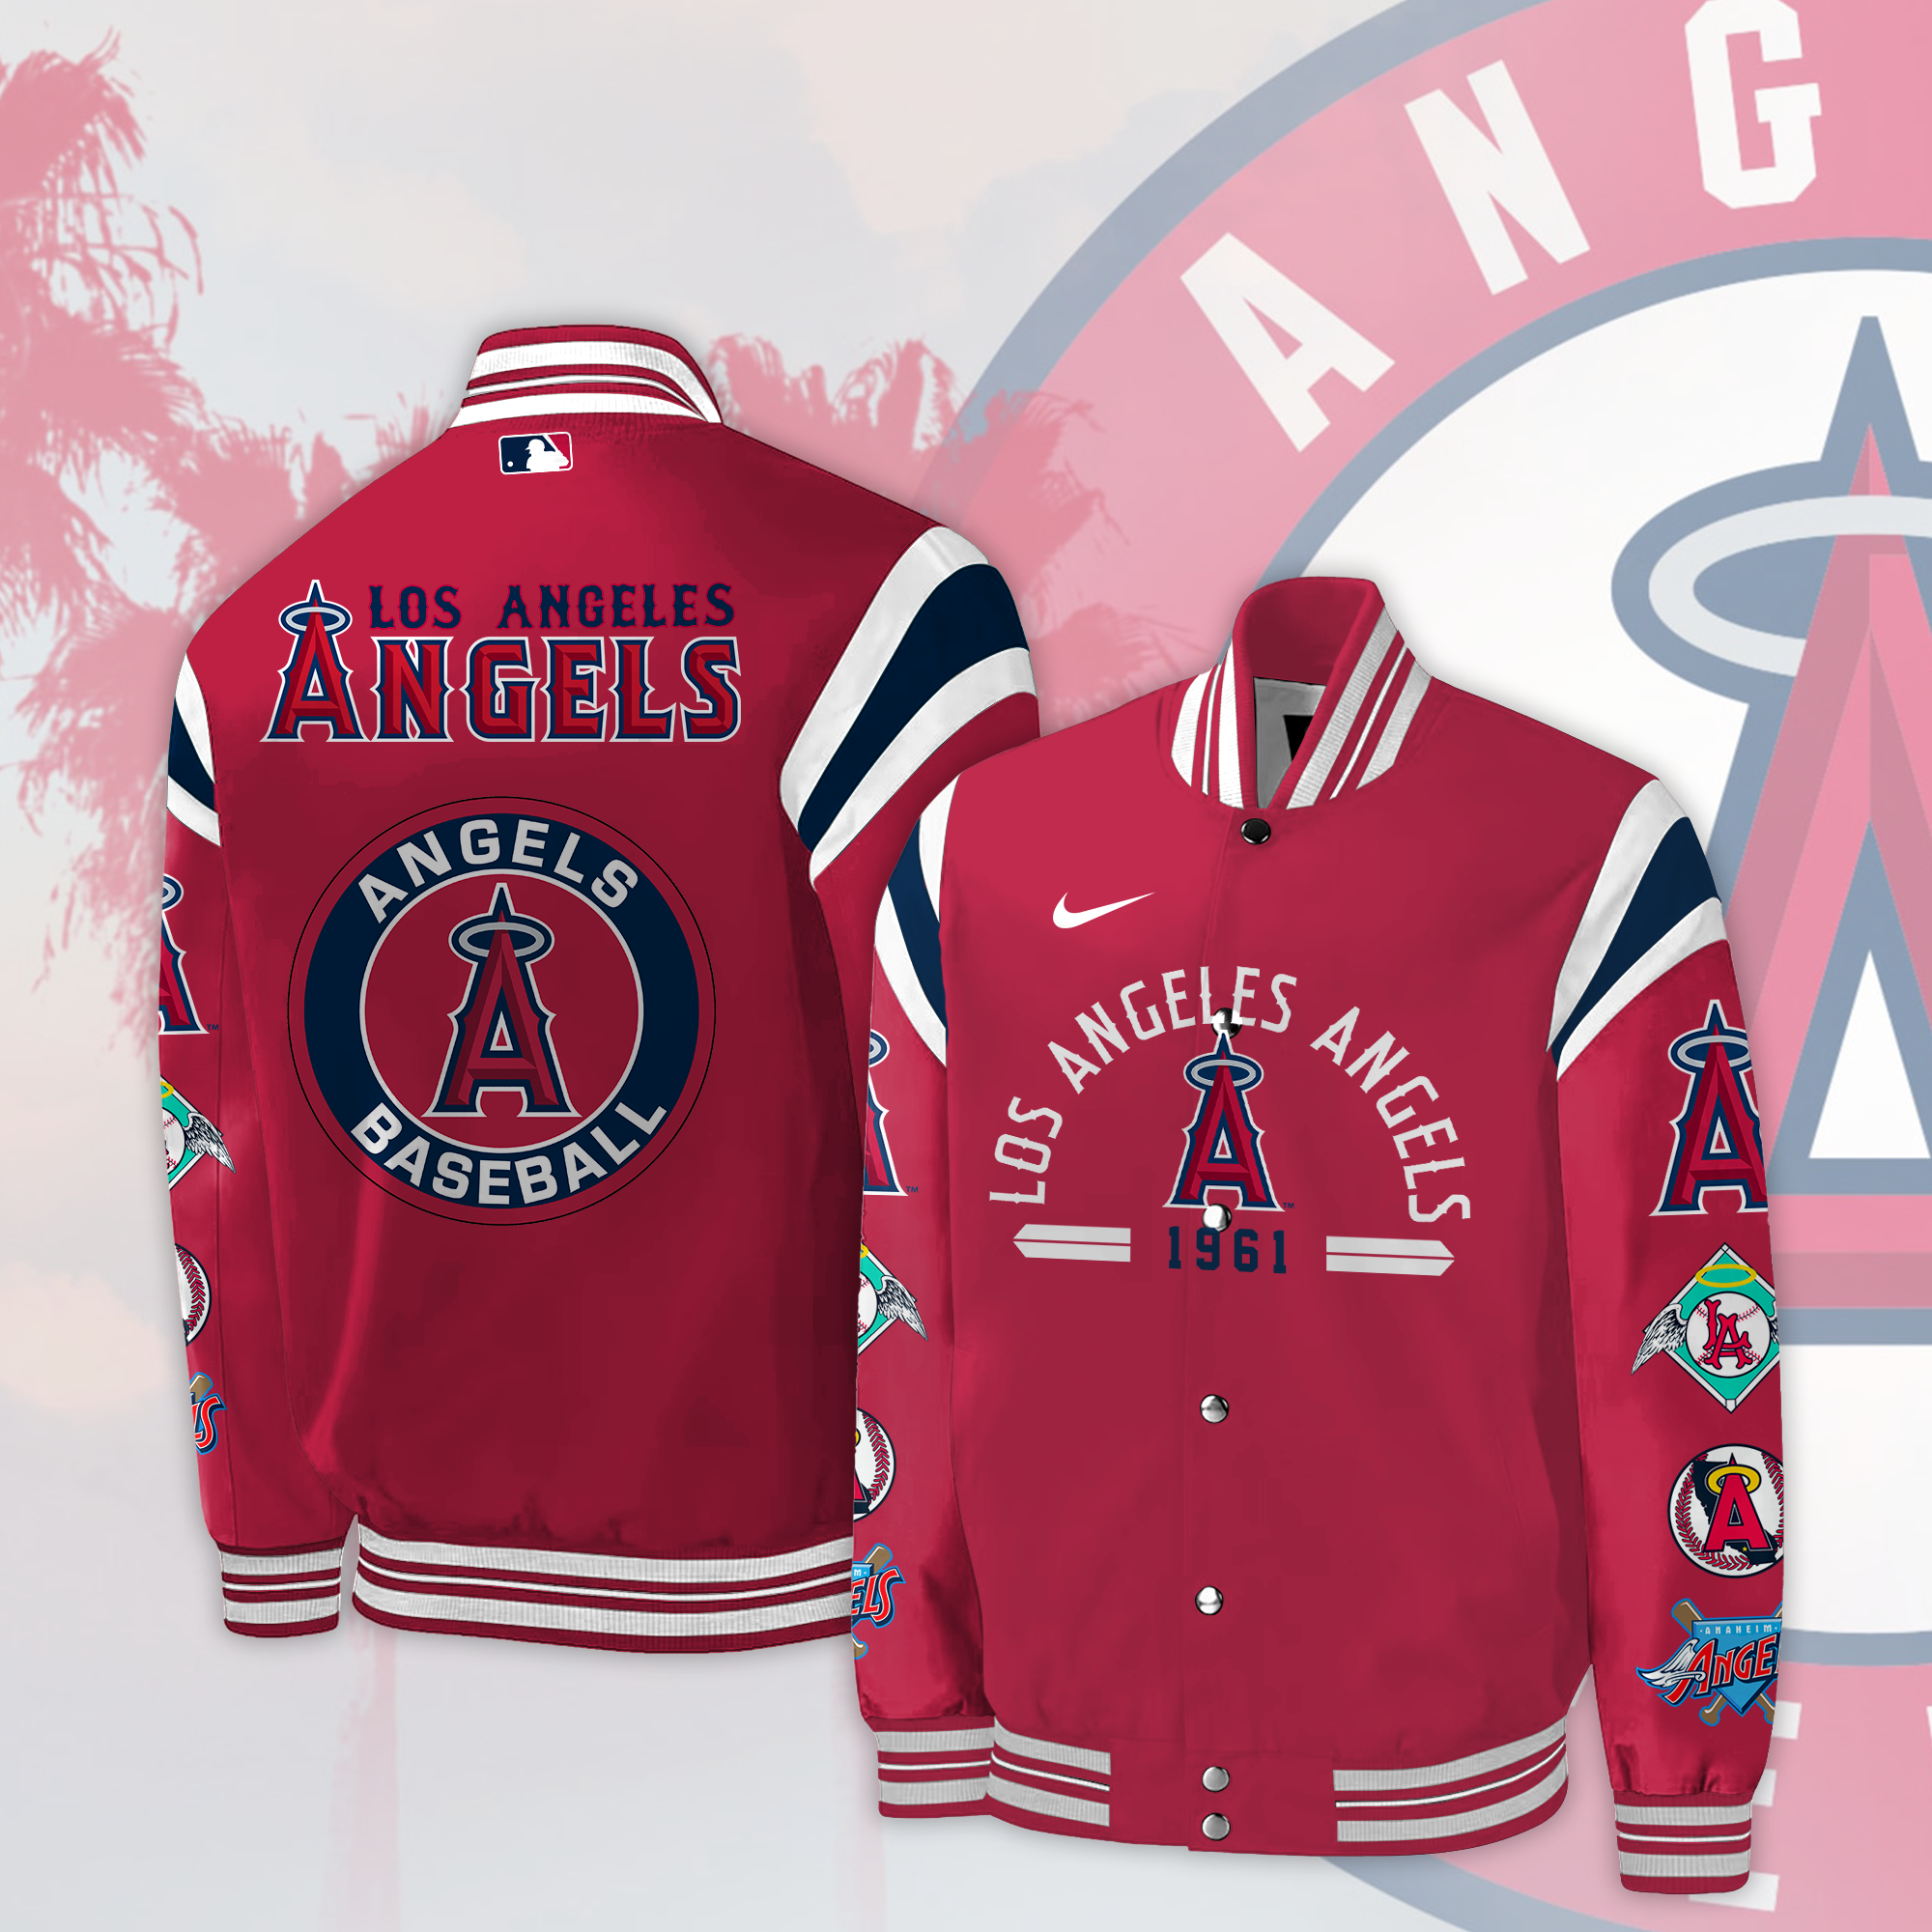 angels 1961 jersey